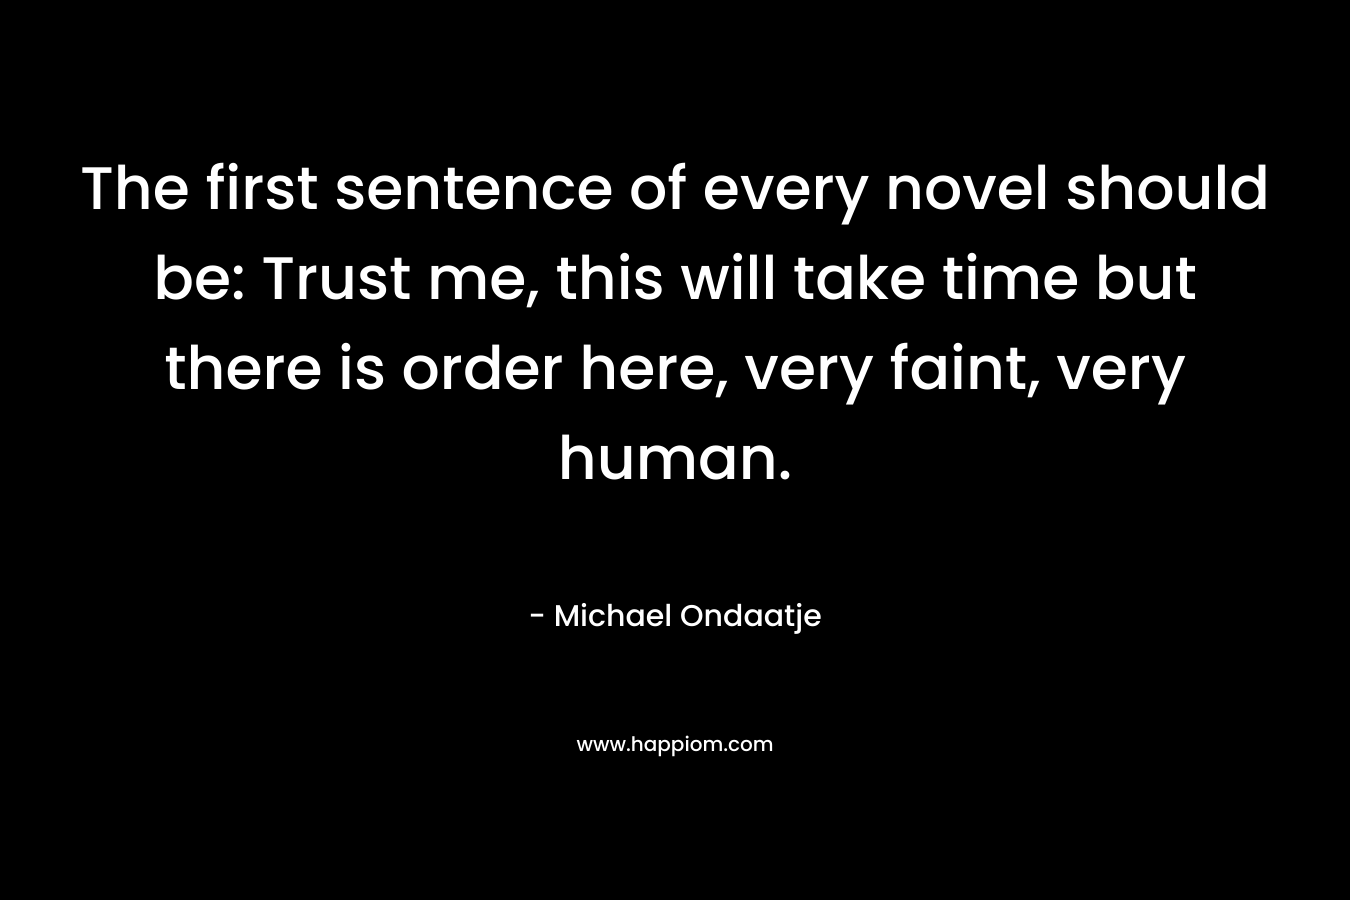 The first sentence of every novel should be: Trust me, this will take time but there is order here, very faint, very human. – Michael Ondaatje